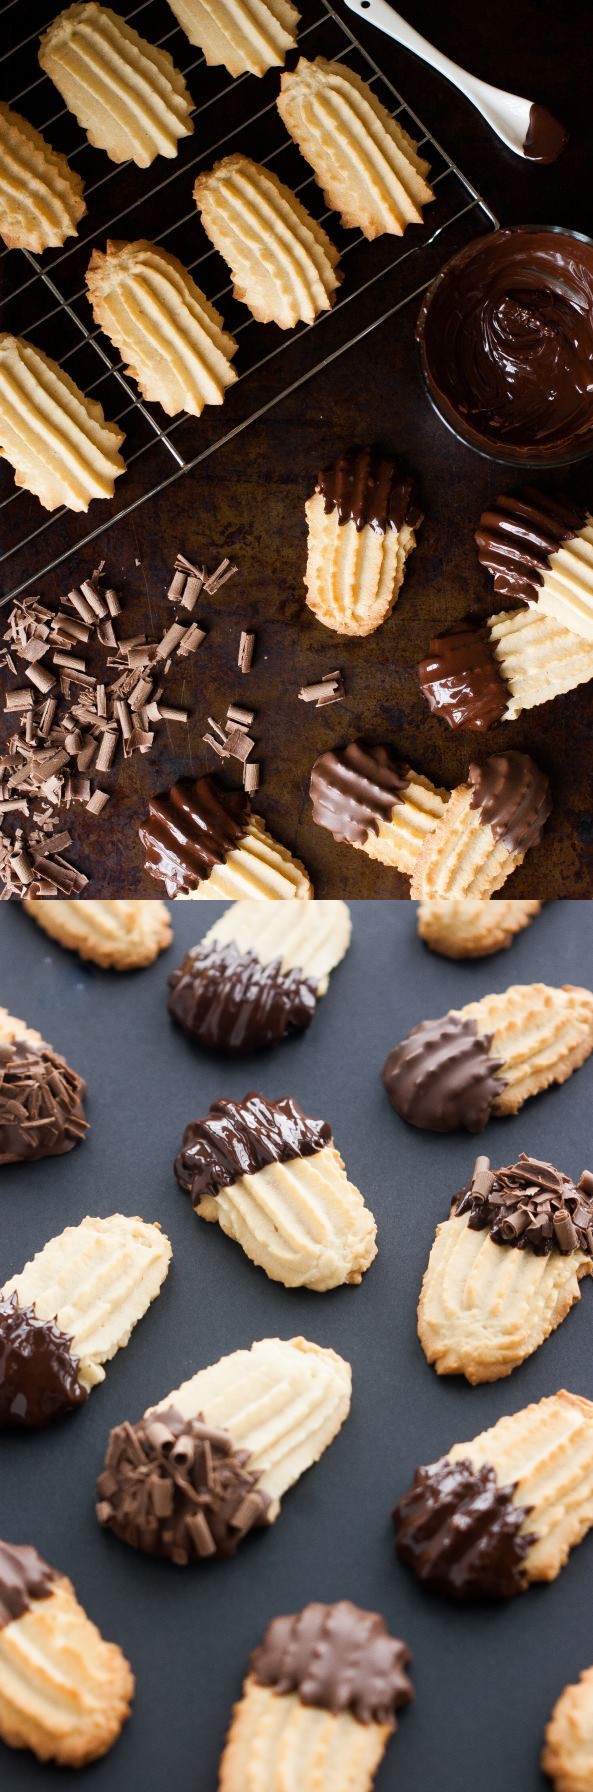 Chocolate Dipped Italian Butter Cookies